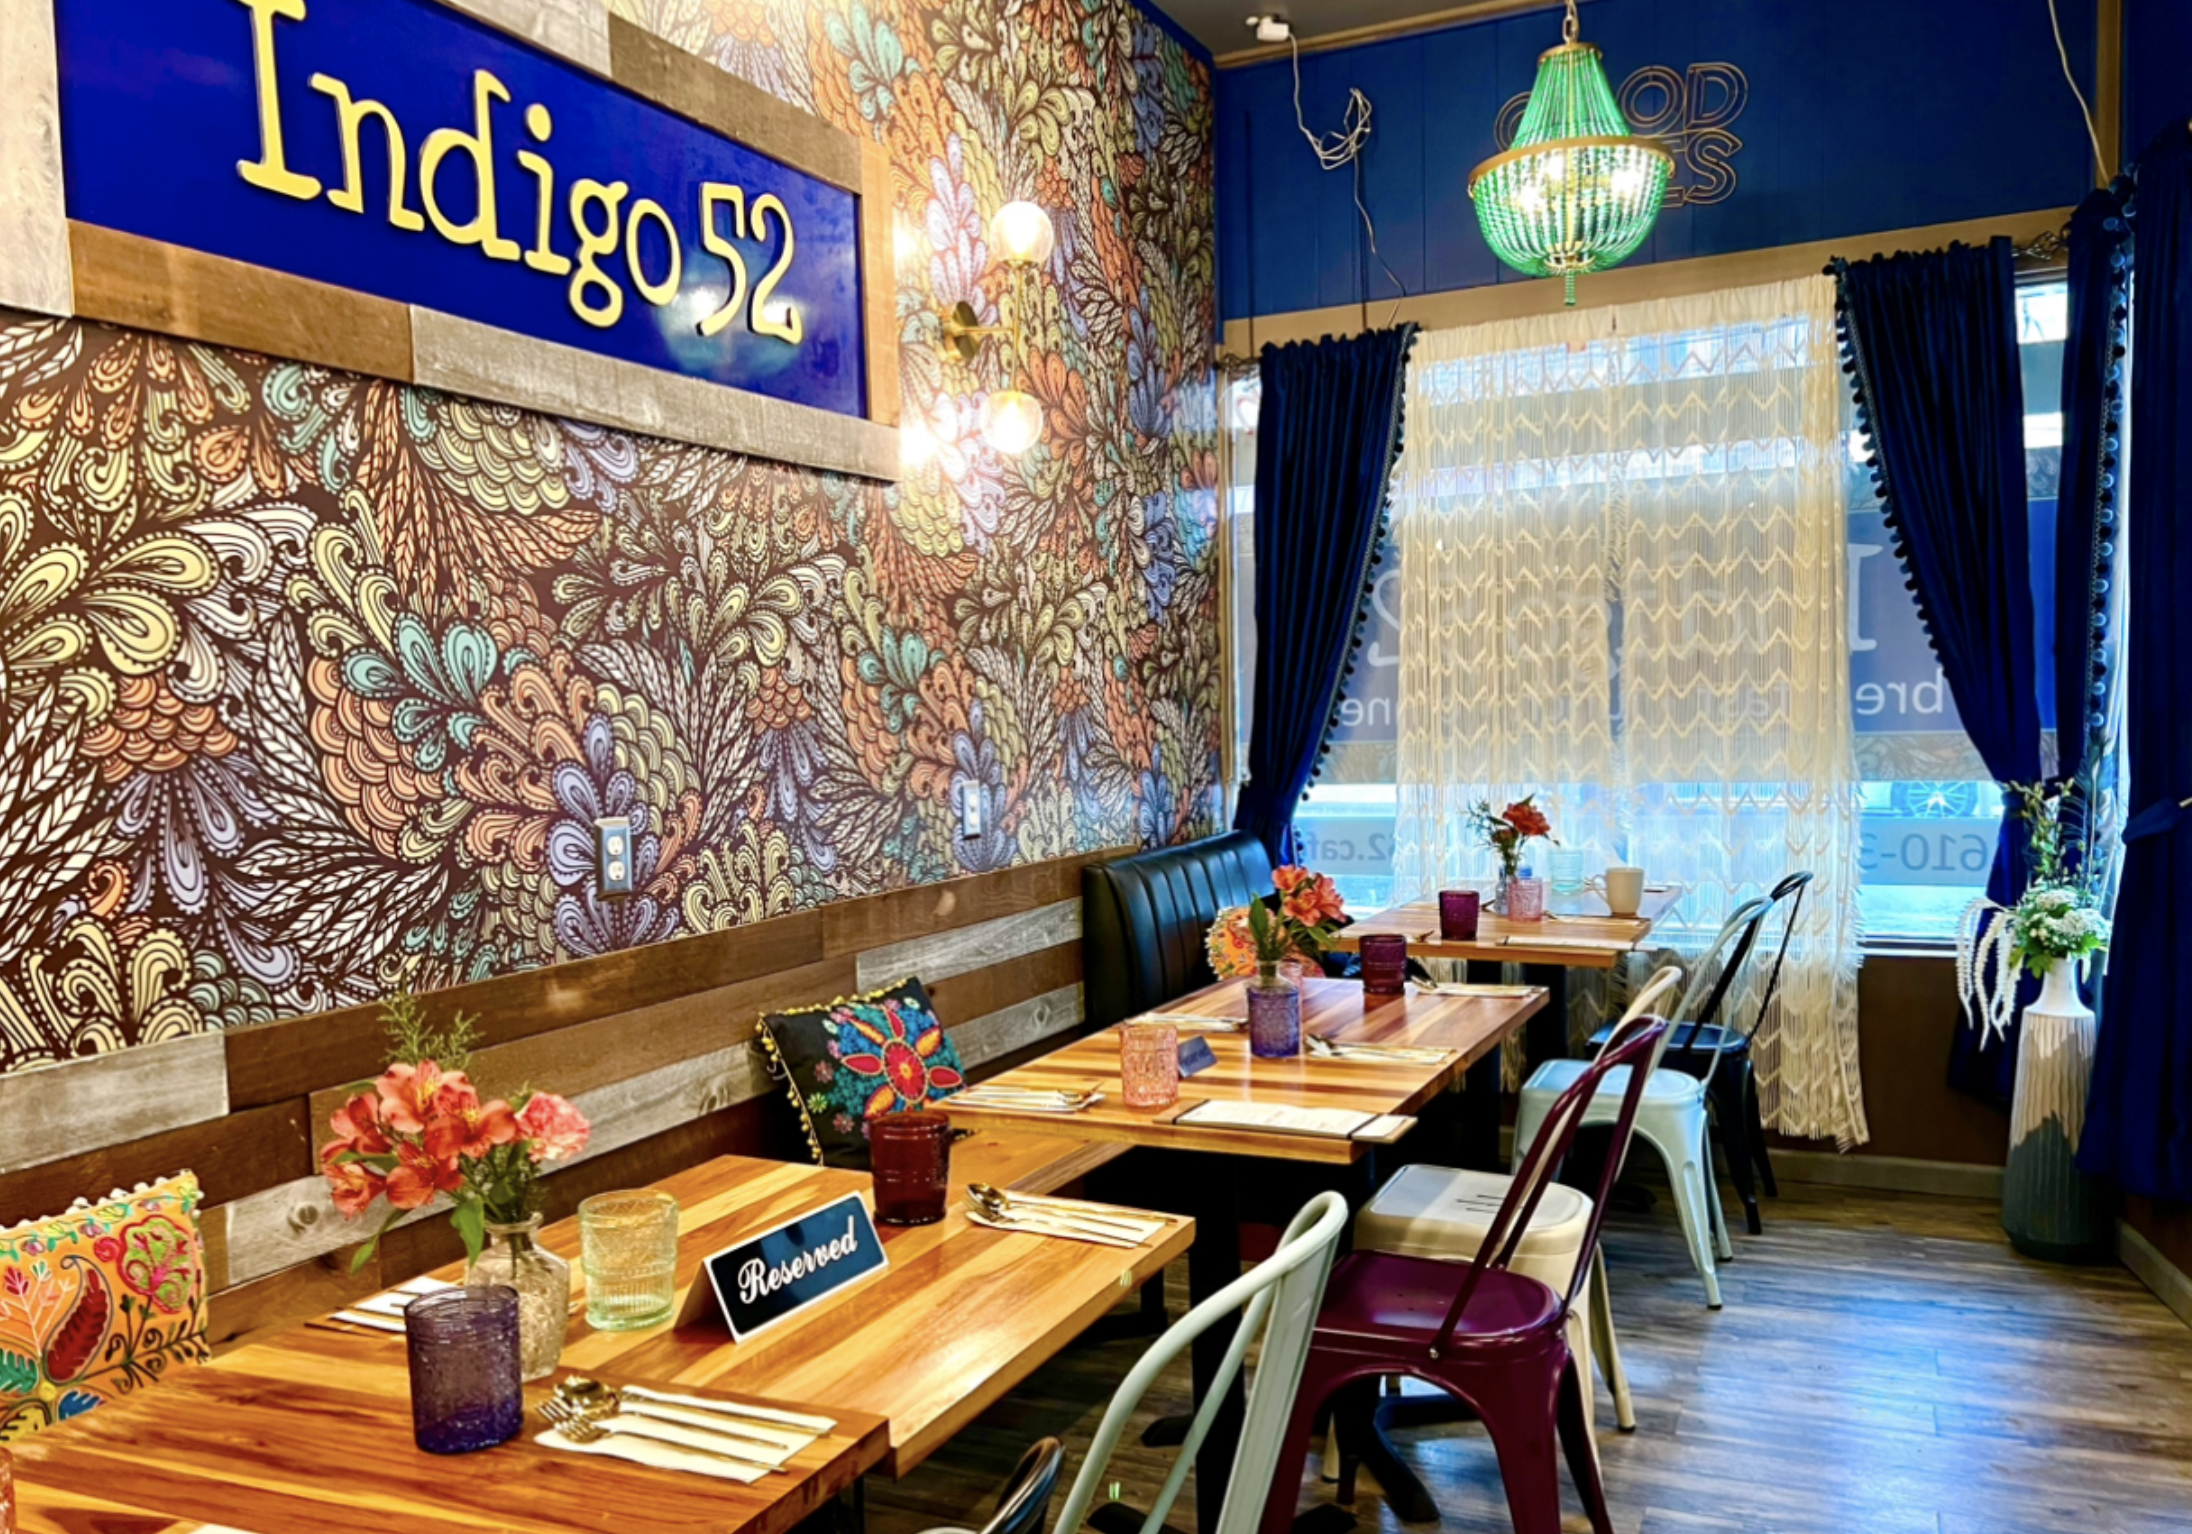 Philly is Falling in Love! New Restaurant Indigo 52 offers Flavor with a Twist